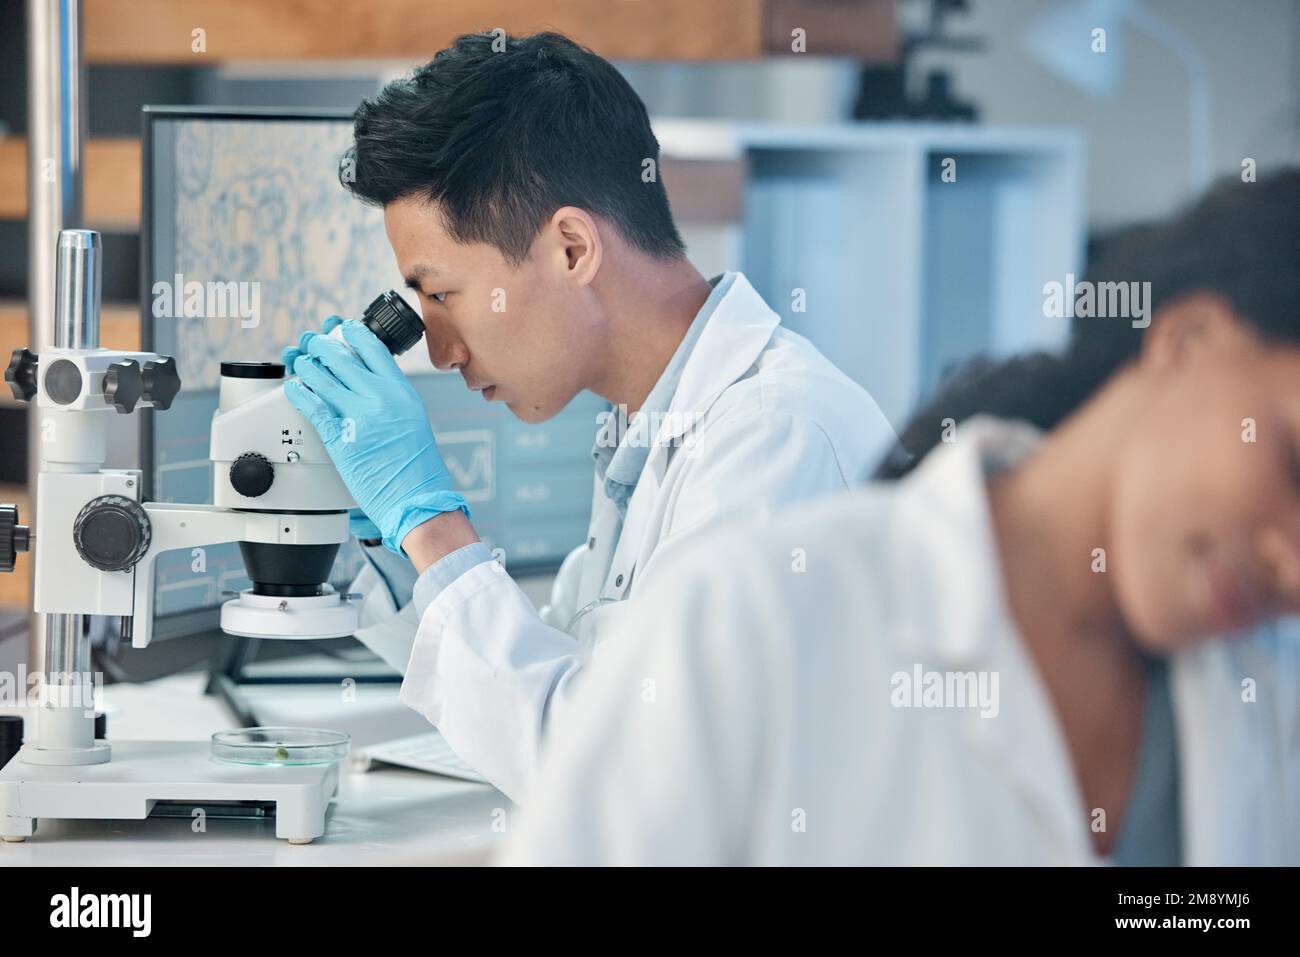 You never know when inspiration may strike. two coworkers peacefully working together in a lab. Stock Photo